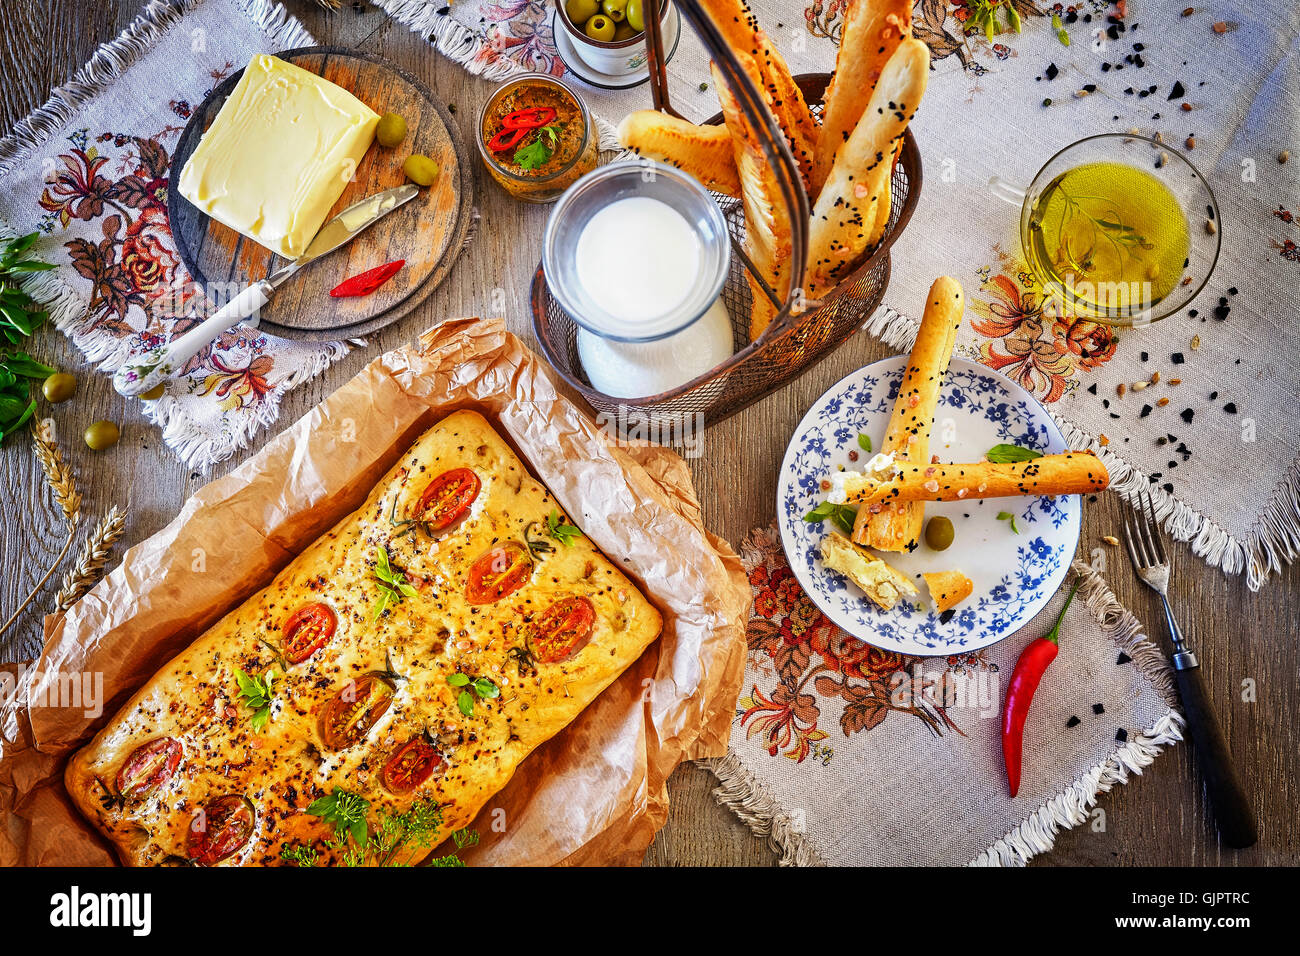 Traditional focaccia in baking paper and bread sticks, rustic setting on a wooden table from above. Stock Photo